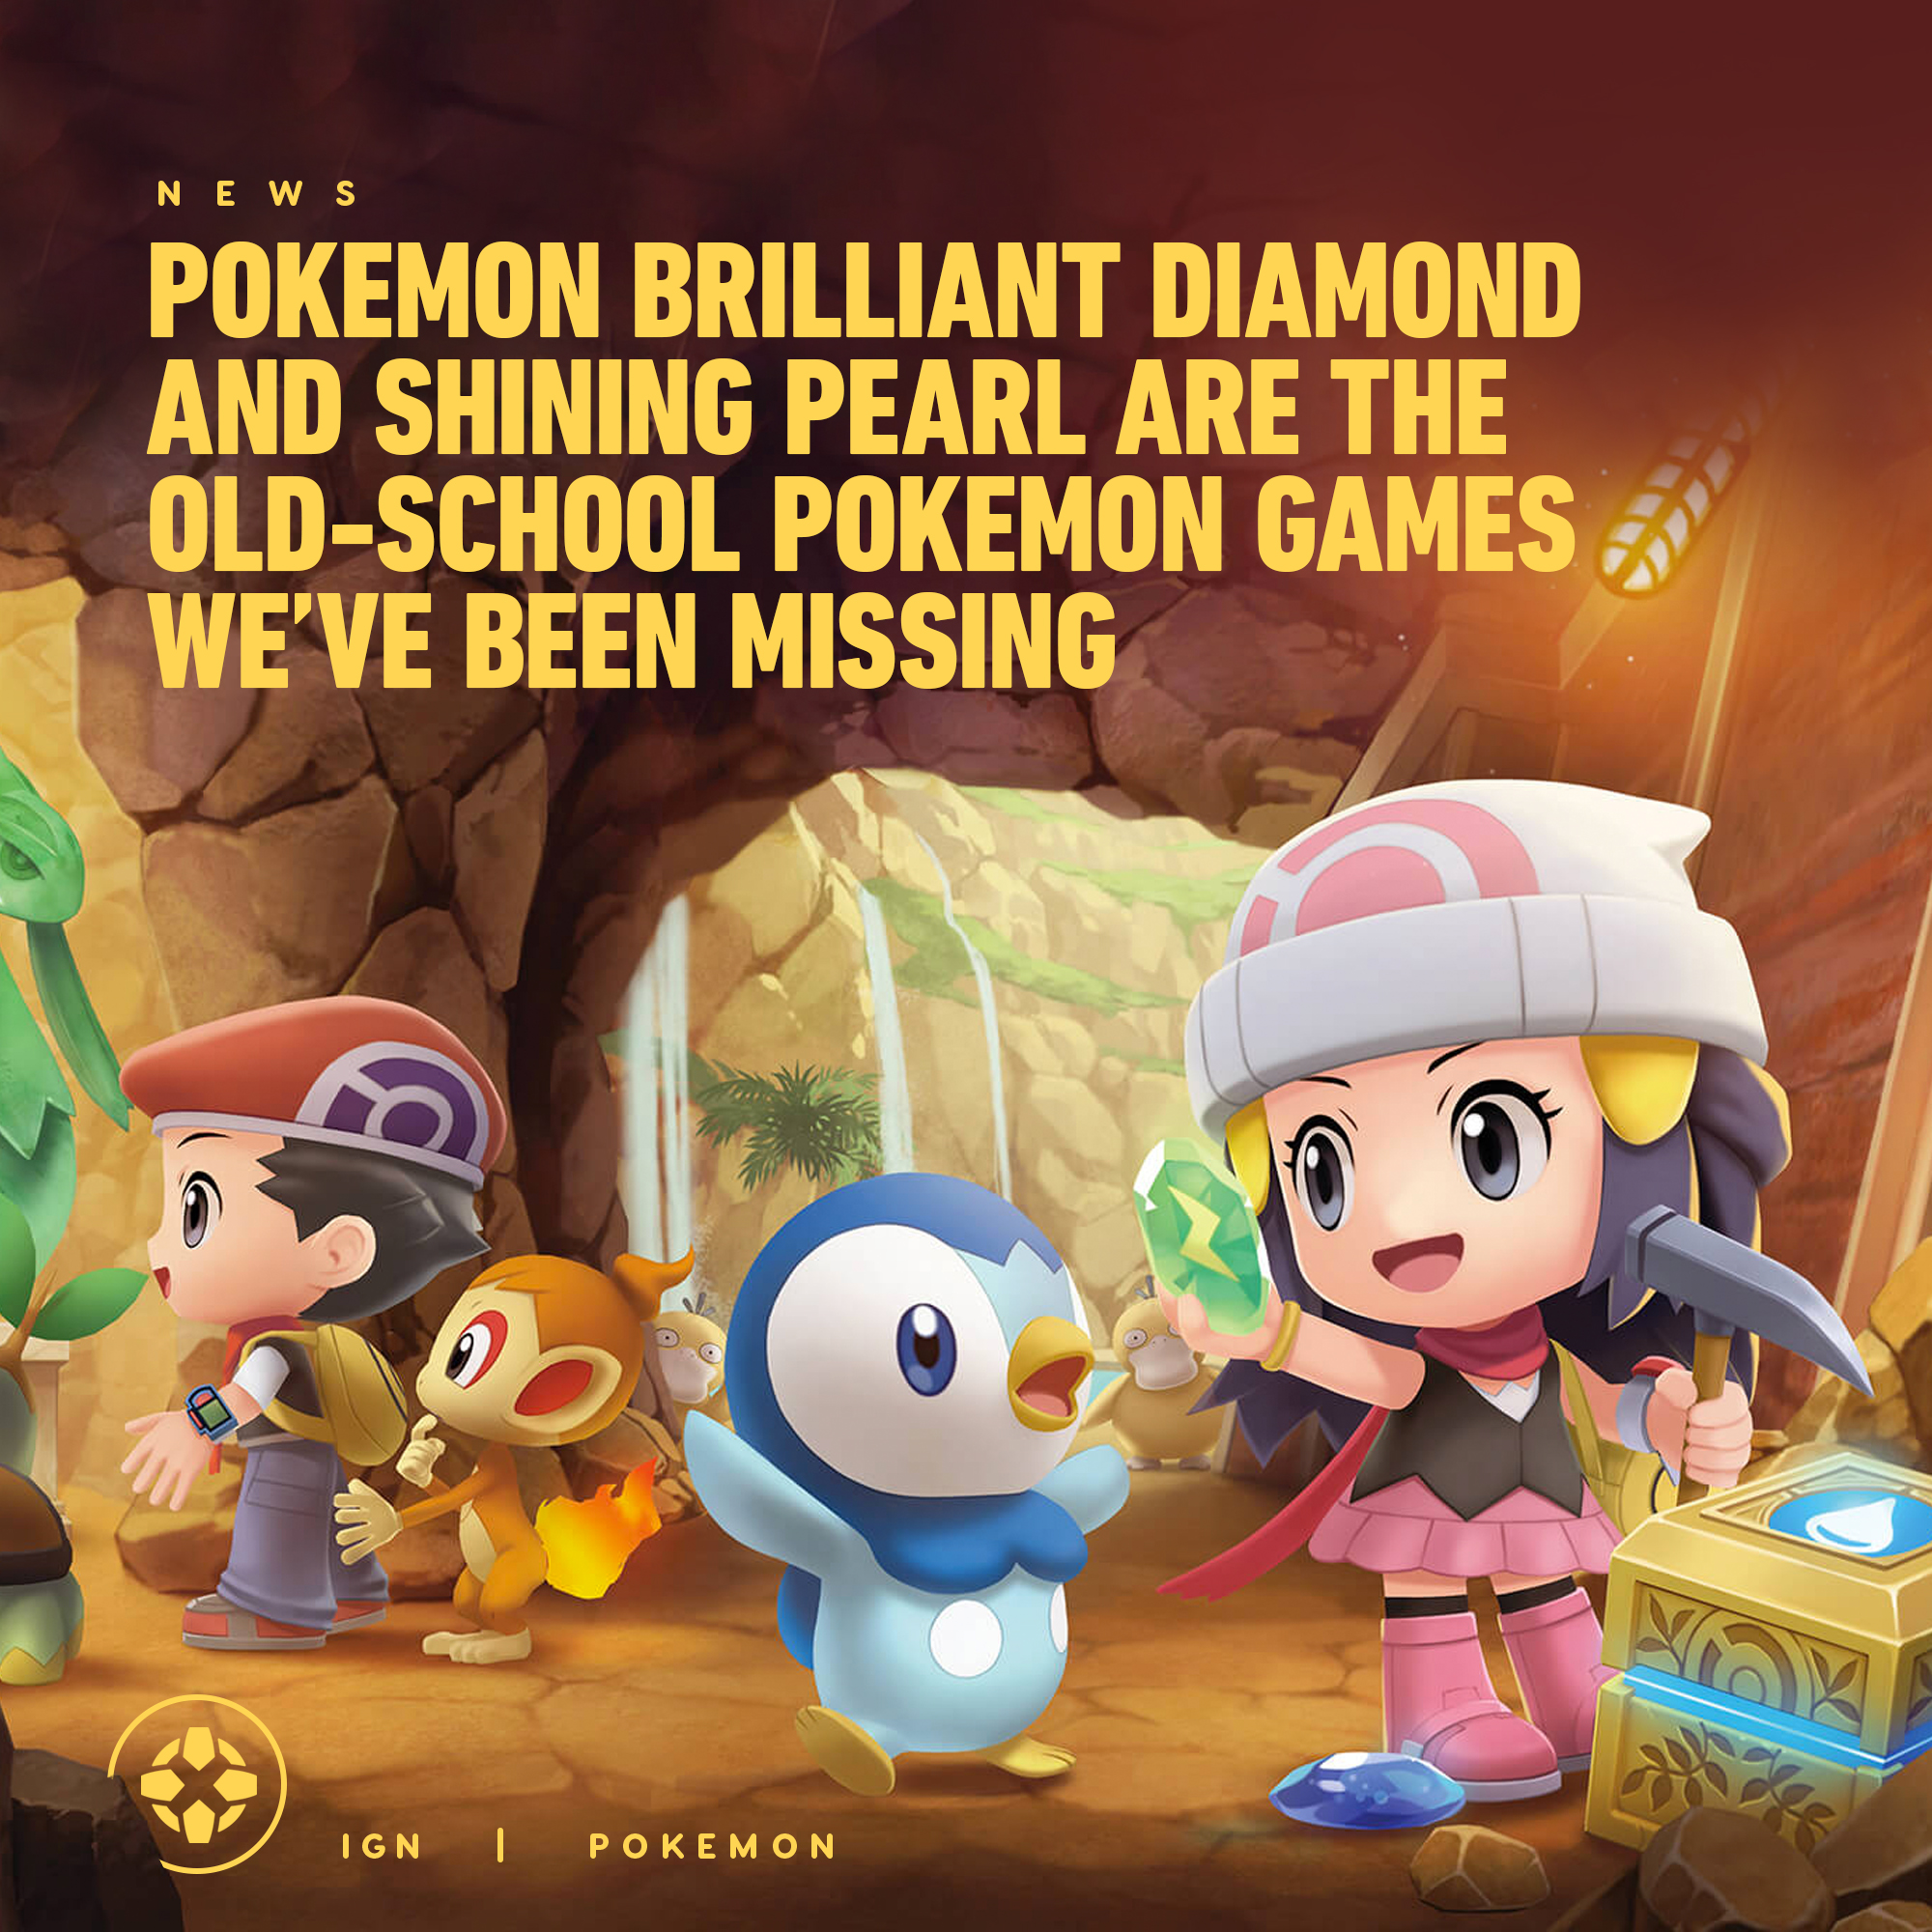 Pokemon Shining Pearl Is on Sale for $29.99 Today - IGN